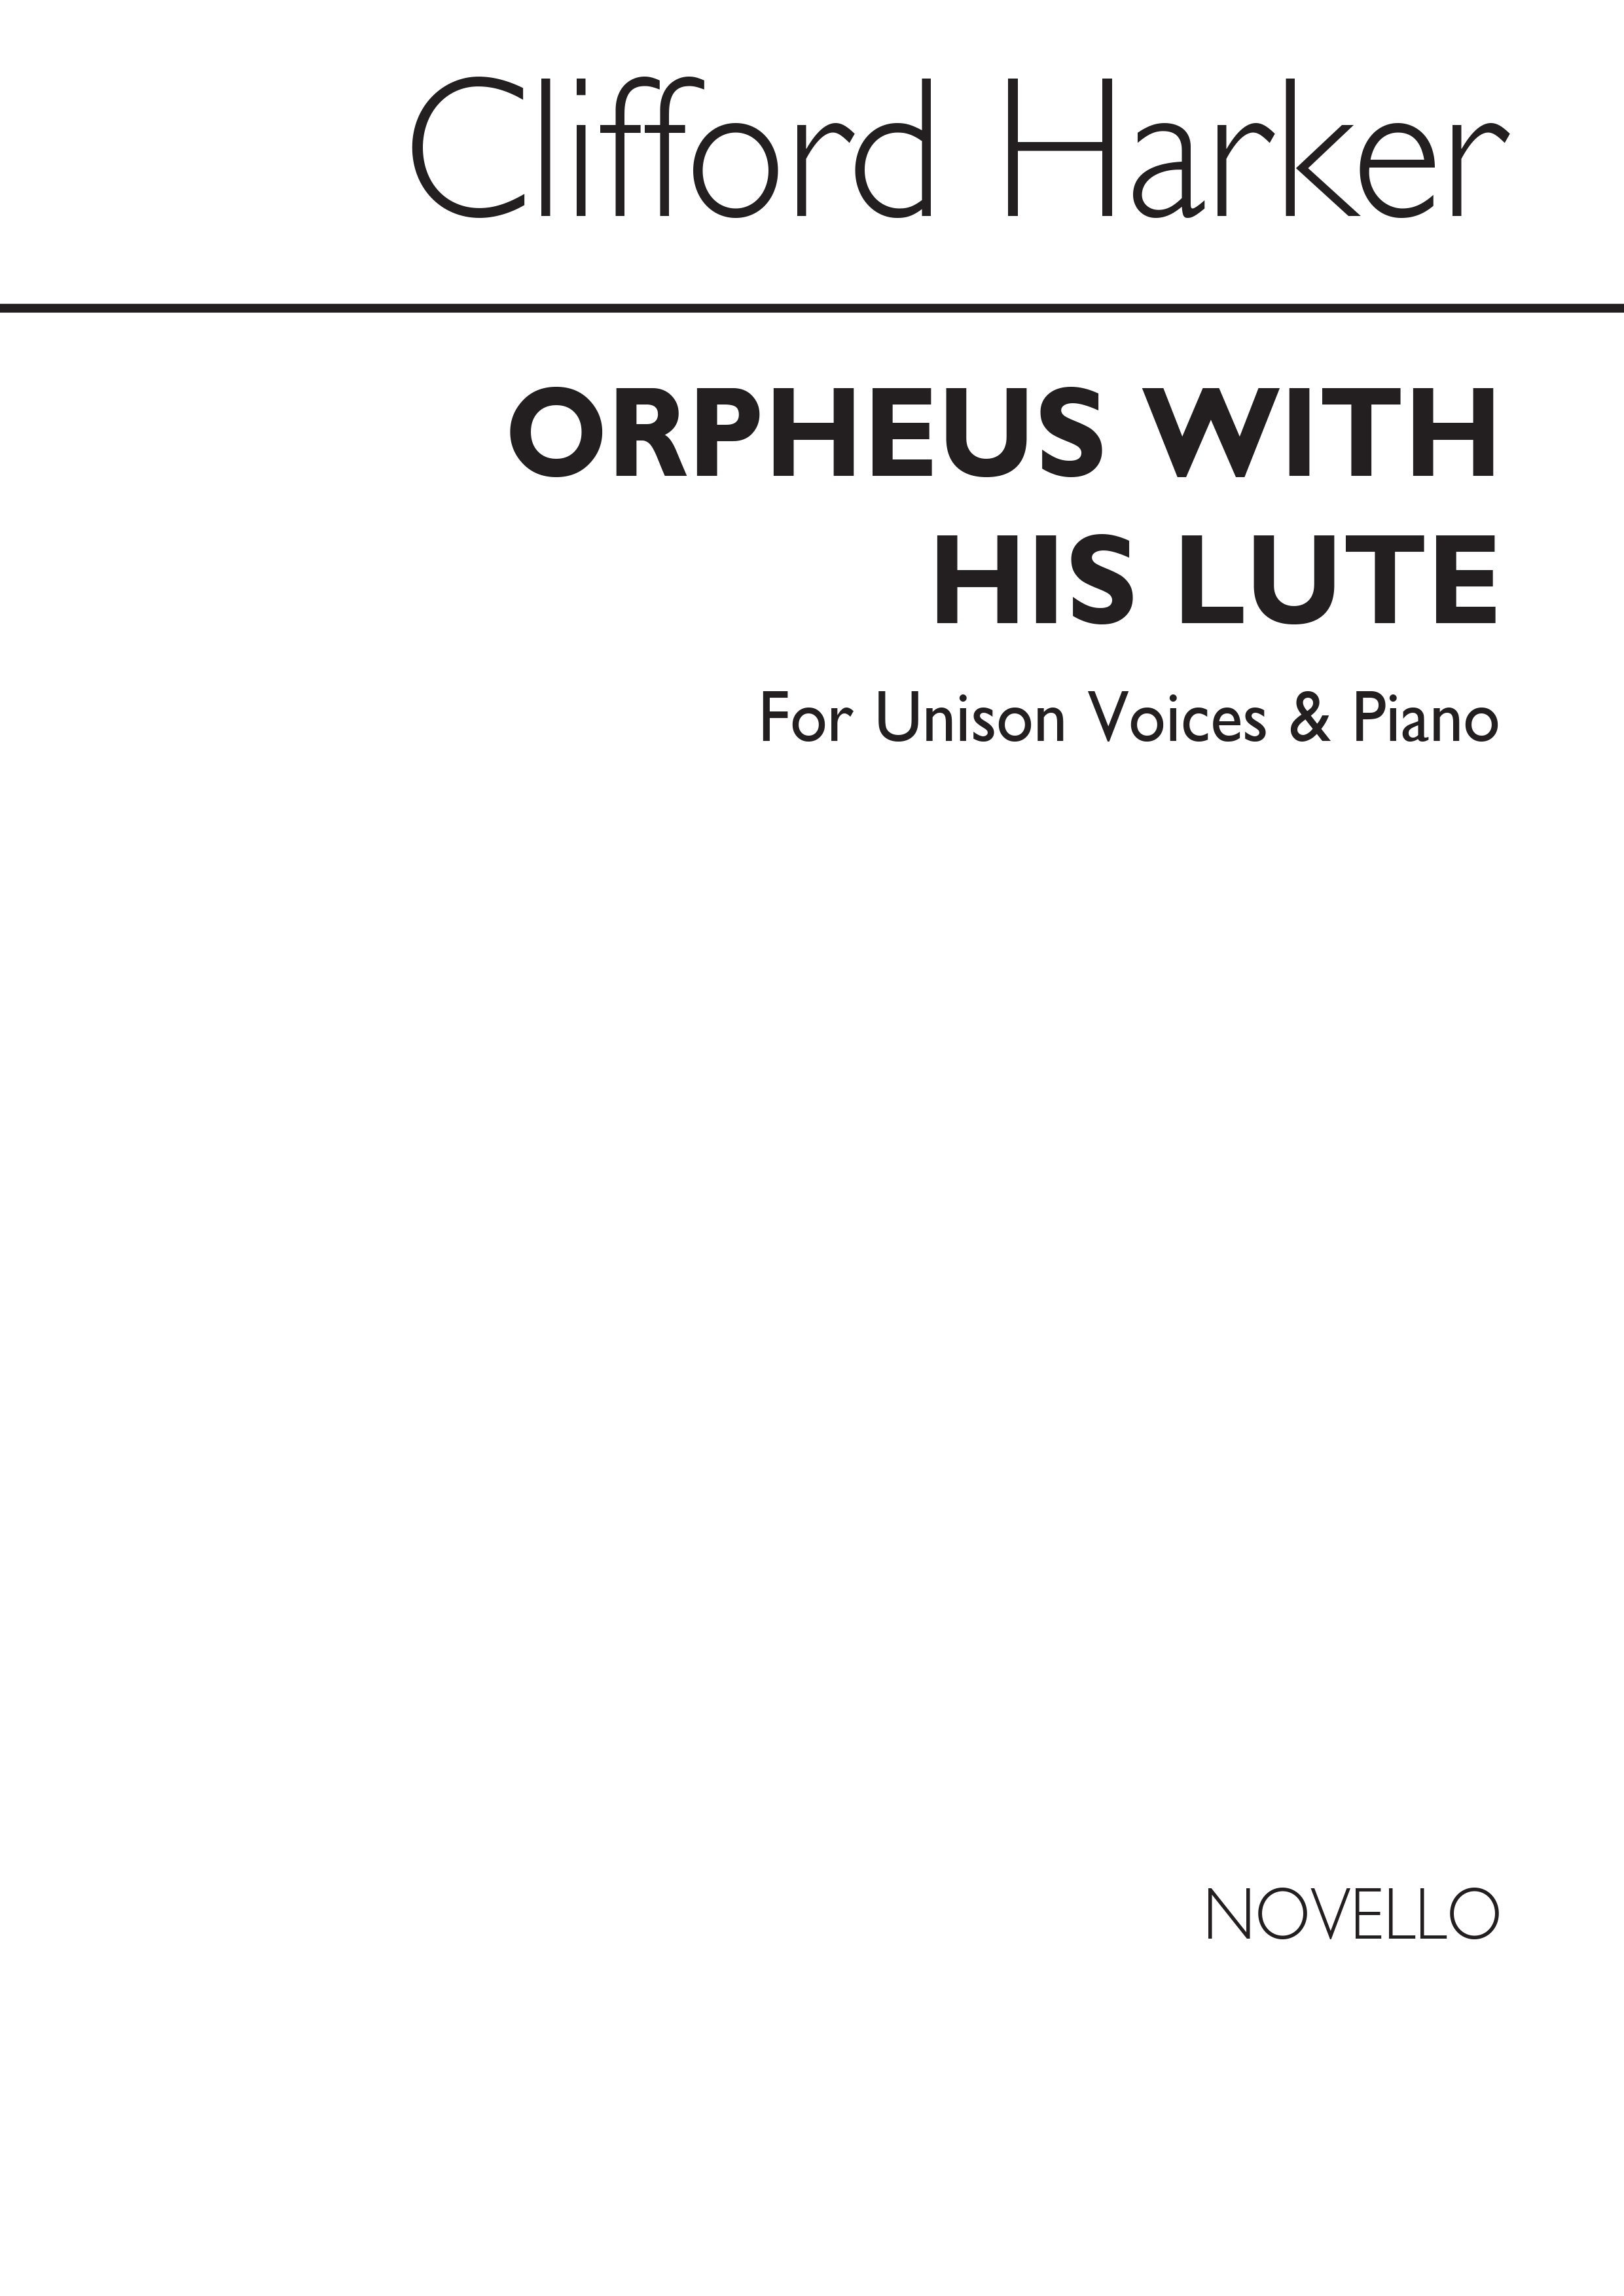 Clifford Harker: Orpheus And His Lute: Voice: Vocal Score